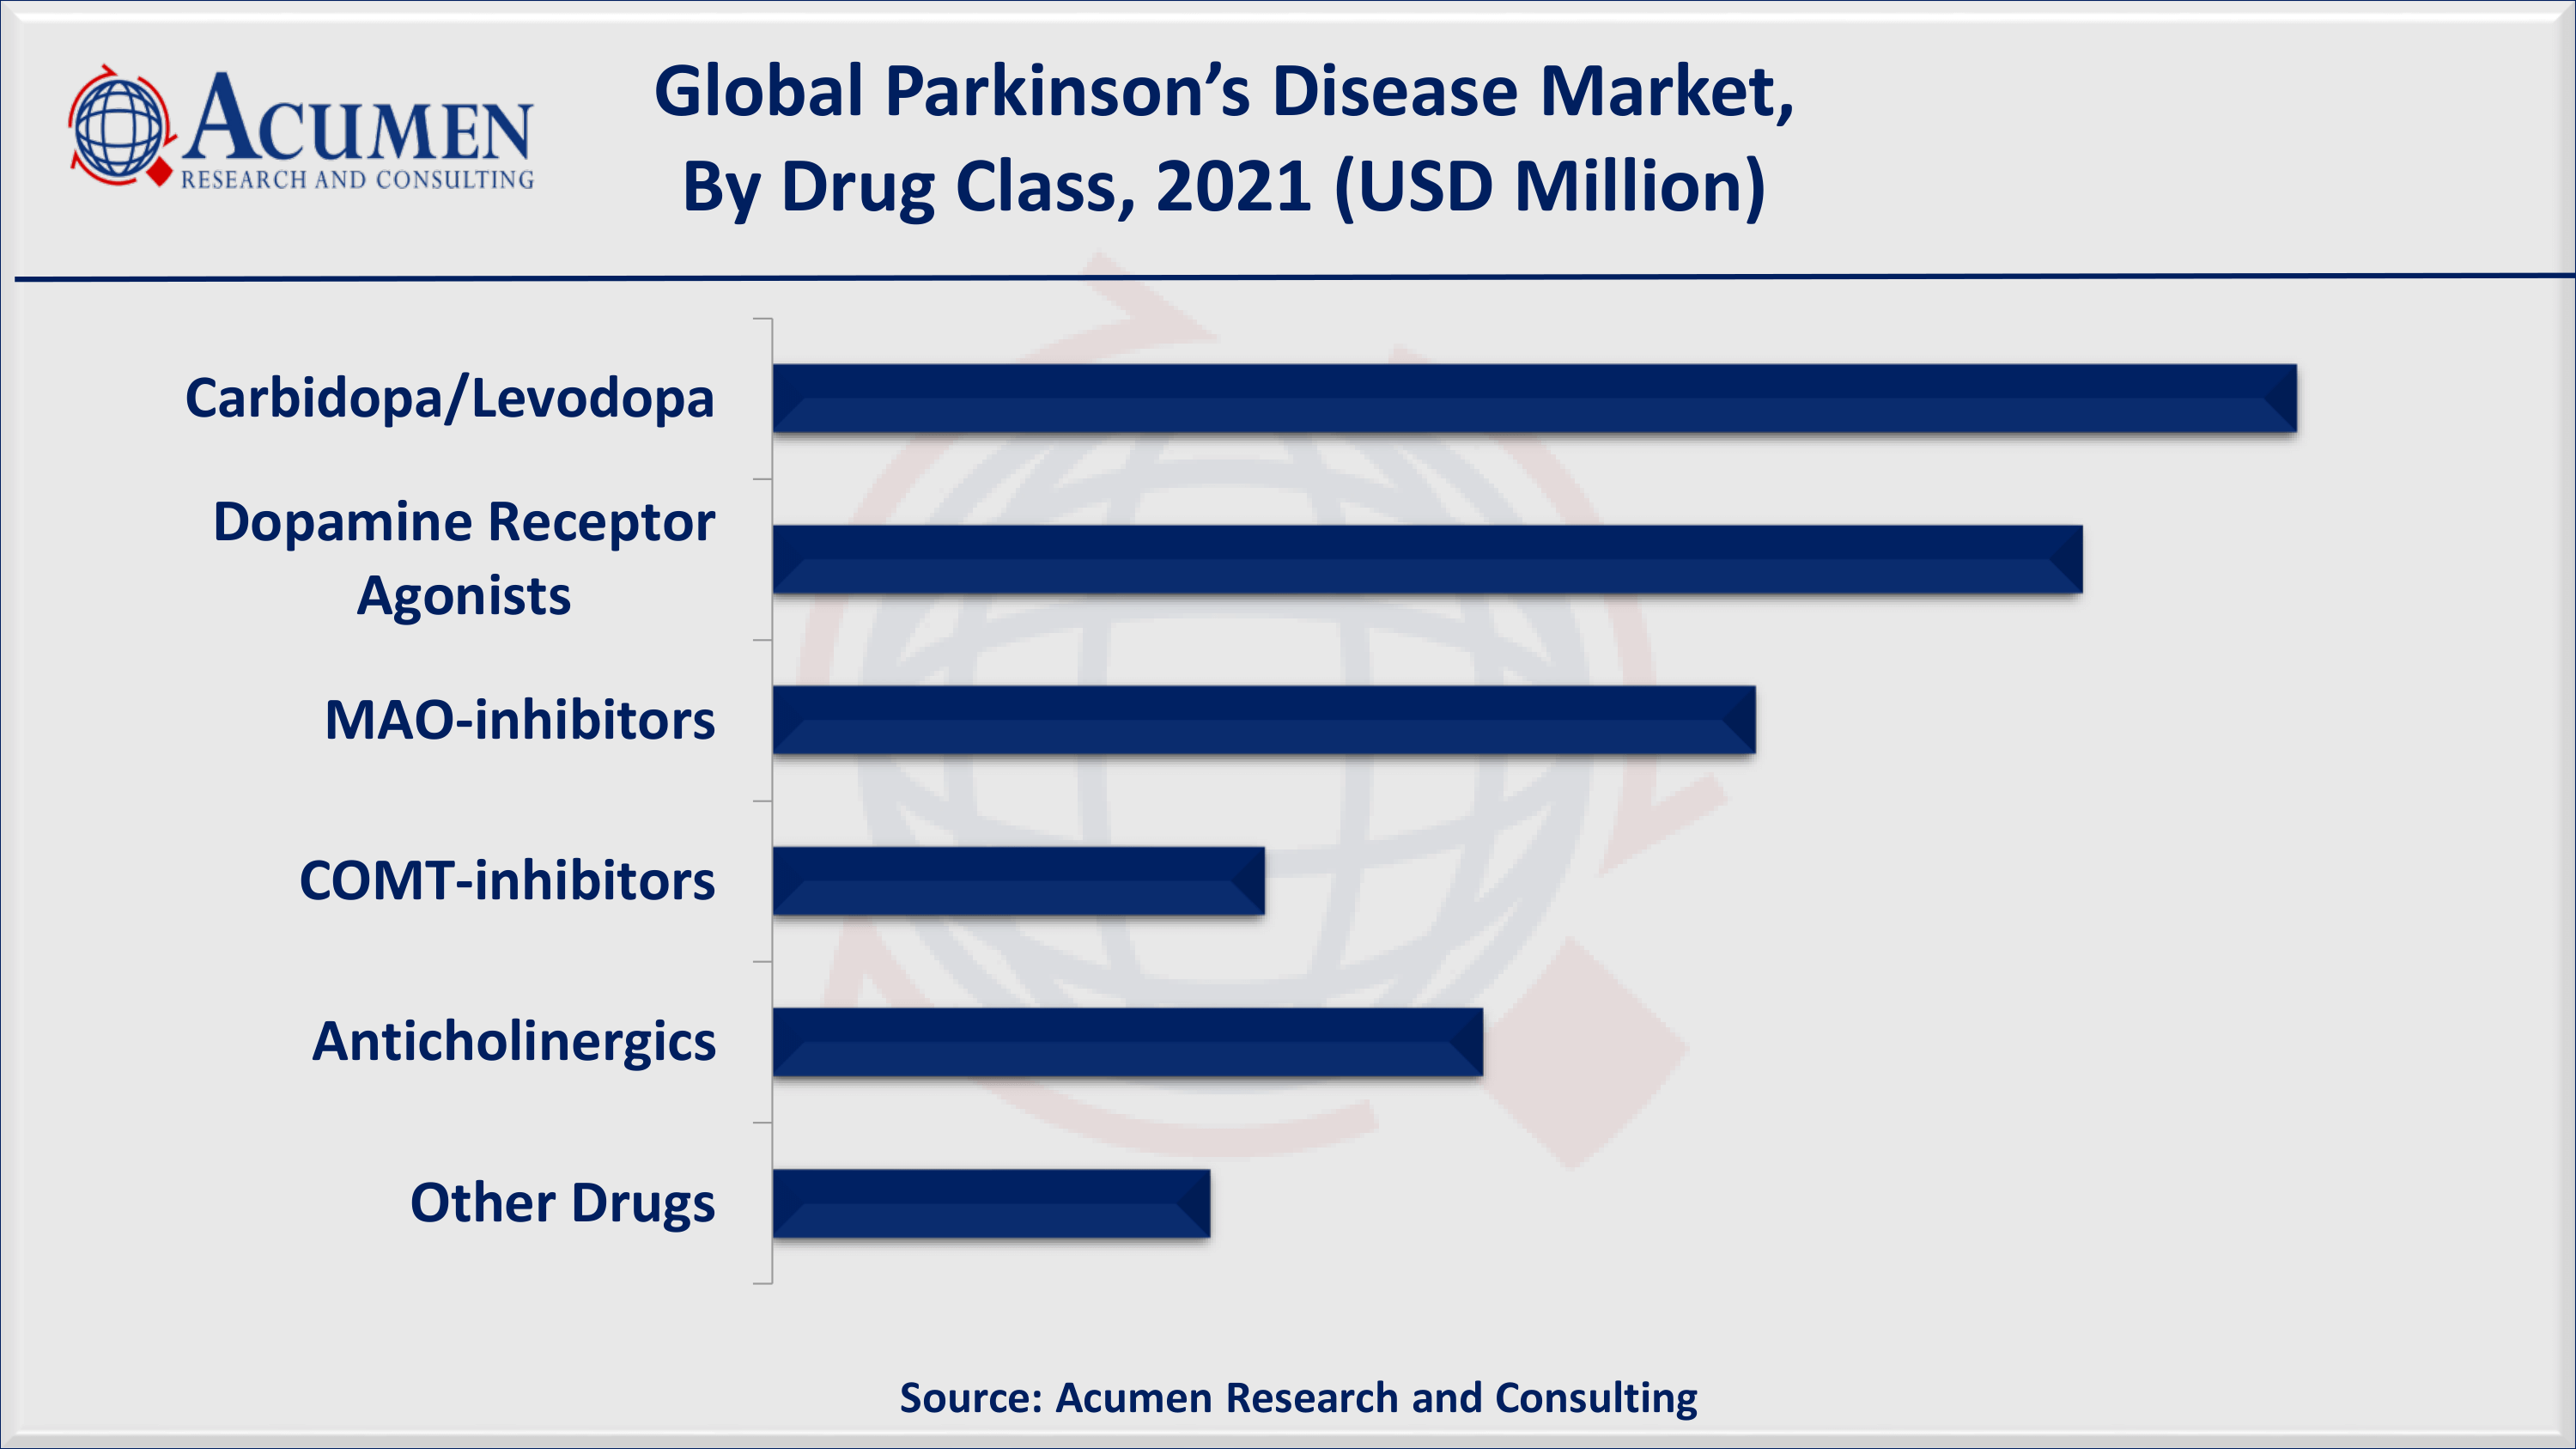 Global Parkinson’s disease market revenue is poised to garner USD 6,705 million by 2030 with a CAGR of 11.5% from 2022 to 2030